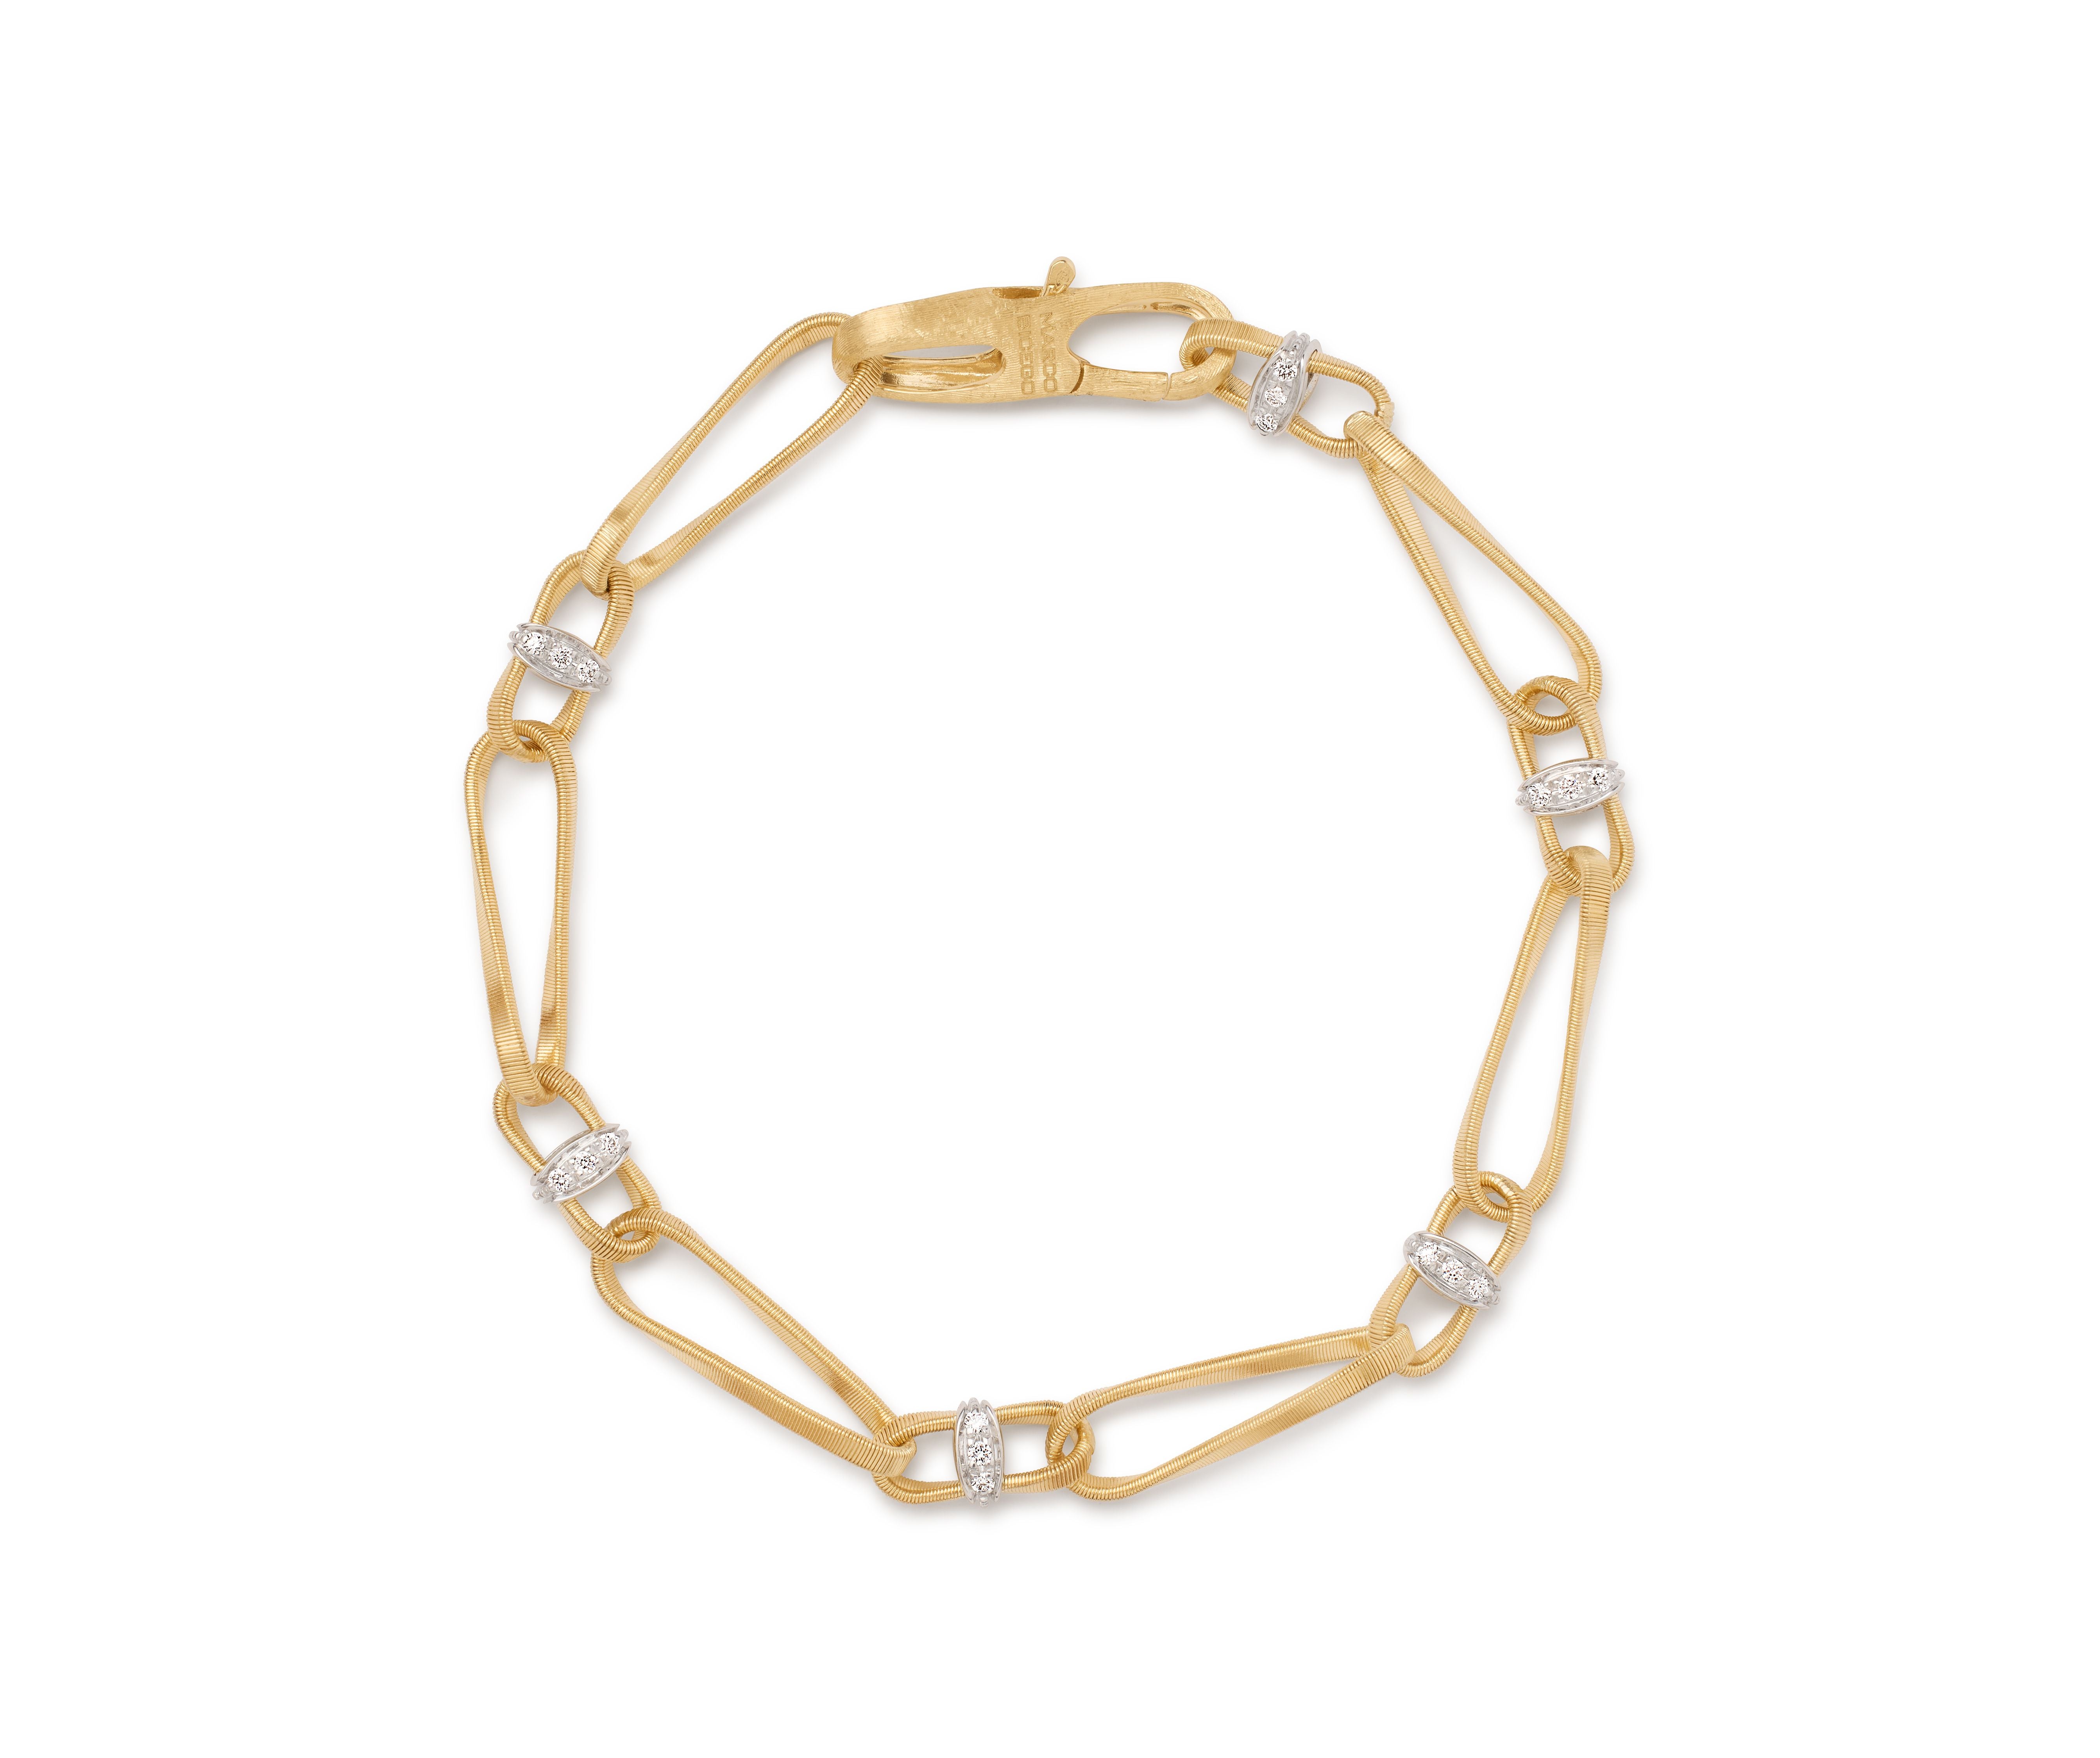 18K YELLOW GOLD TWISTED COIL LINK BRACELET WITH DIAMONDS